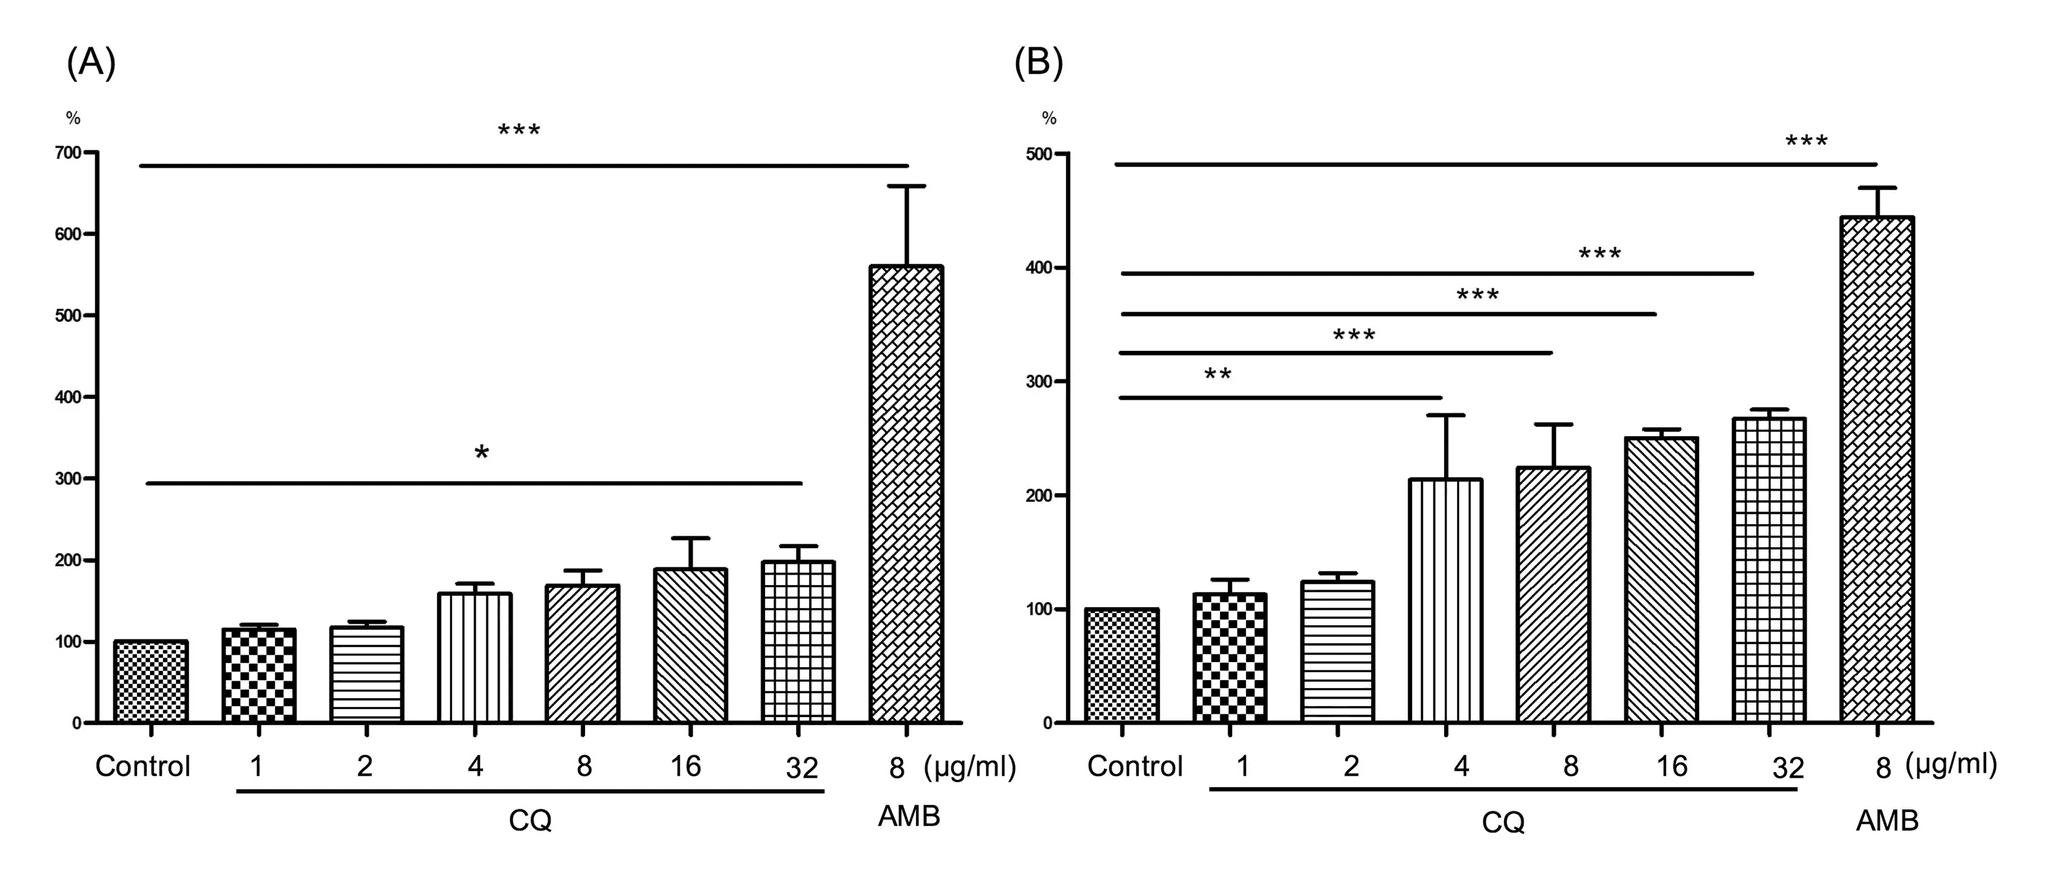 The effect of clioquinol in cell membrane. a) Using propidium iodide influx assay to evaluate the influence on plasma membrane integrity; b) Using DiBAC4(3) to evaluate the membrane potential. CQ increased DiBAC4(3) fluorescence intensity by 12.8, 23.8, 113.7, 124.2, 147.8 and 167.2% at different concentrations (1, 2, 4, 8, 16 and 32 μg/ml) compared with untreated cells, respectively. *, p < 0.05; **, p < 0.001; ***, p < 0.0001; DiBAC4(3), bis-(1,3-dibutylbarbituric acid) trimethine oxonol; CQ, clioquinol; AMB, amphotericin B. Source: <b>The effects of clioquinol in morphogenesis, cell membrane and ion homeostasis in <em>Candida albicans</em></b> by Zimeng You, Chaoliang Zhang & Yuping Ran. <em>BMC Microbiology</em>, June 2020.